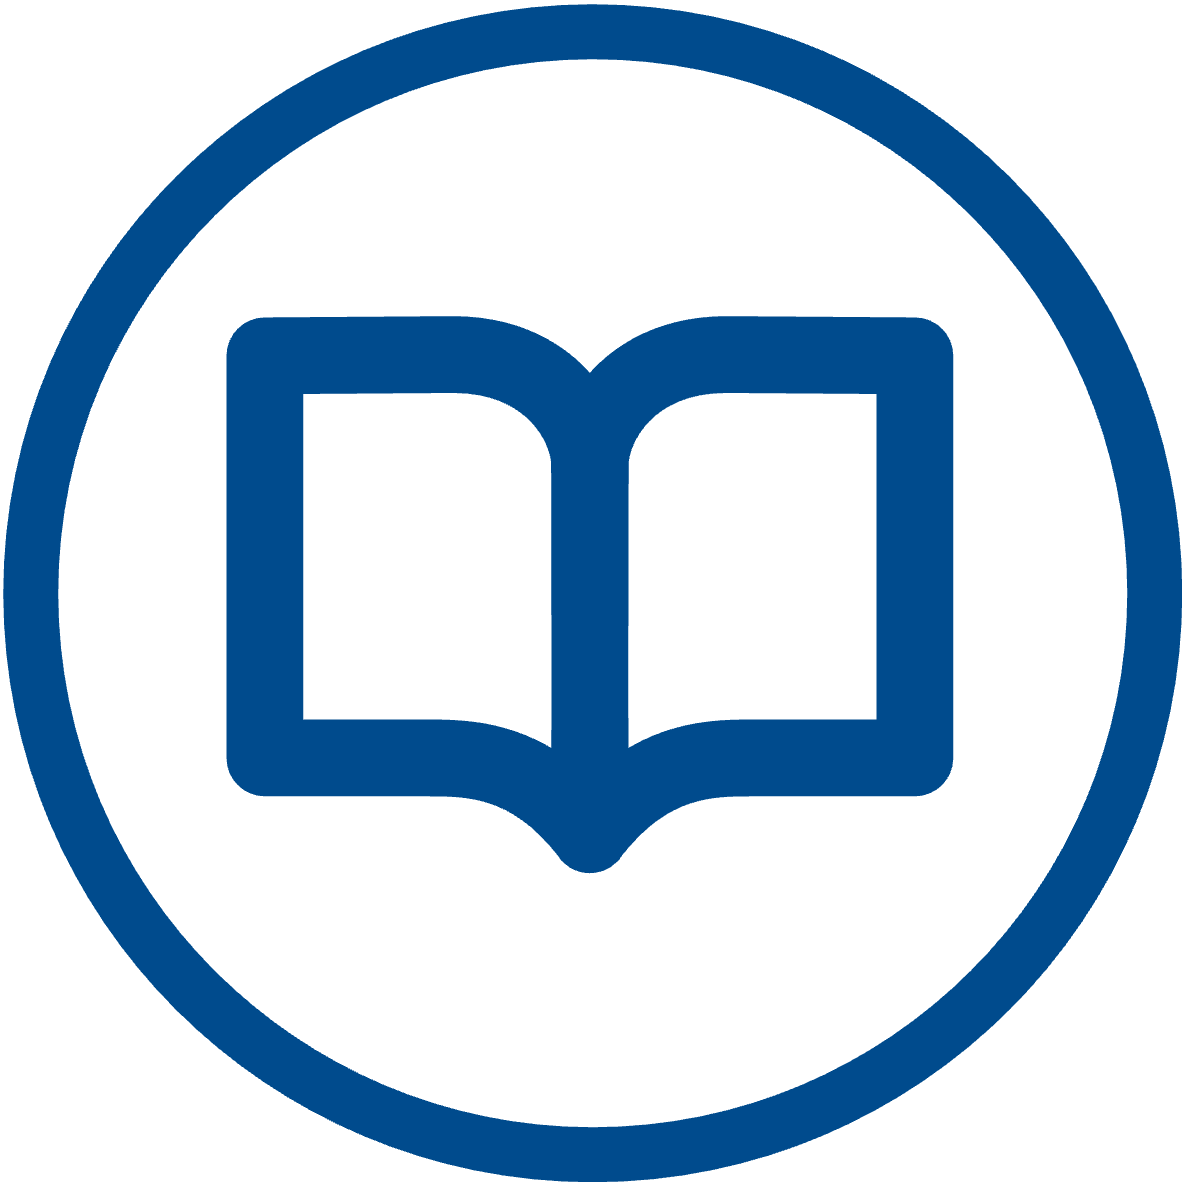 Icon of open book inside a circle